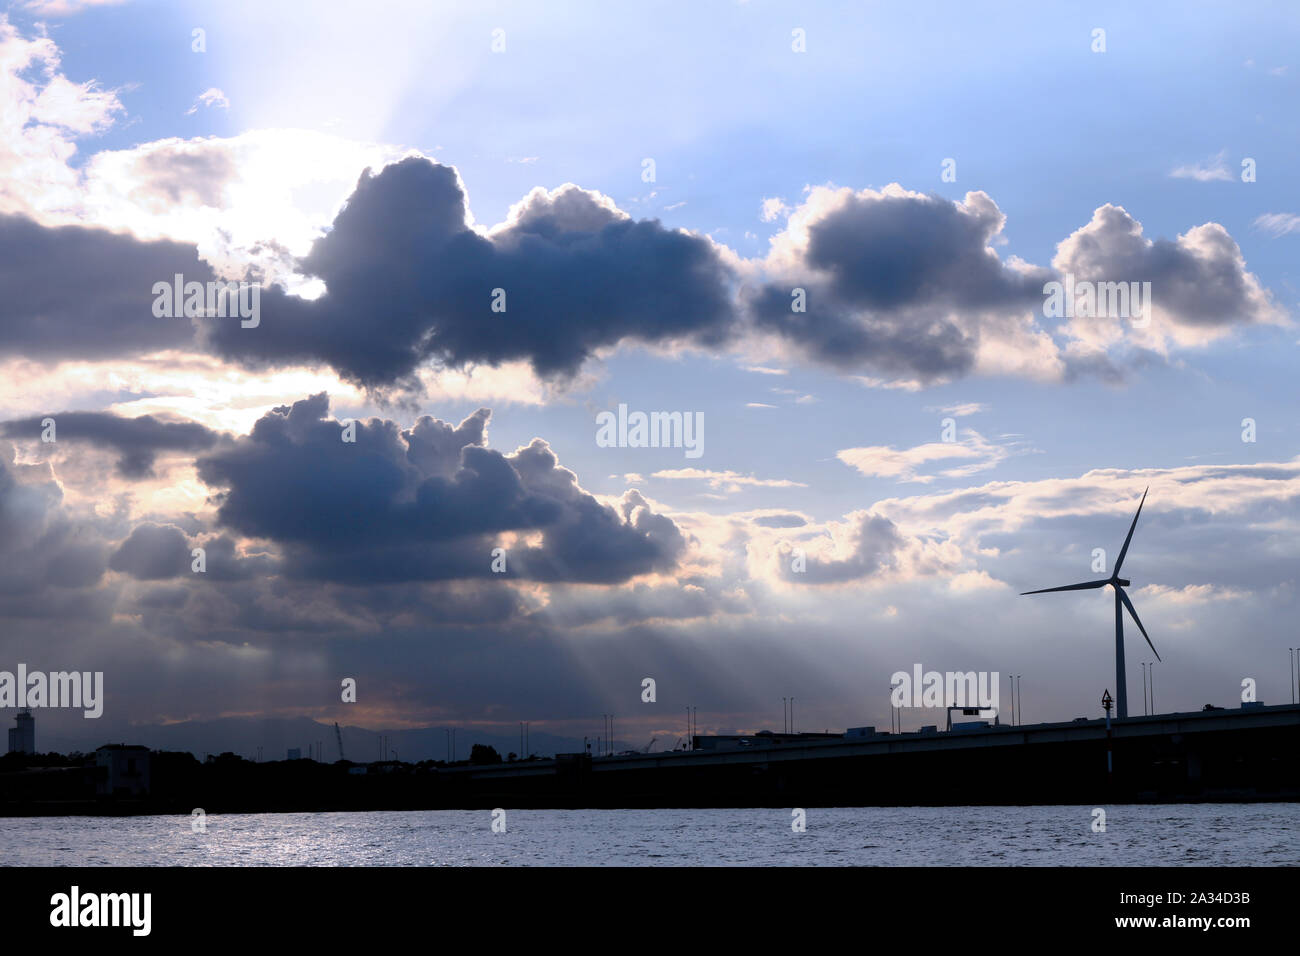 A wind power generator built in a dramatic sky Stock Photo